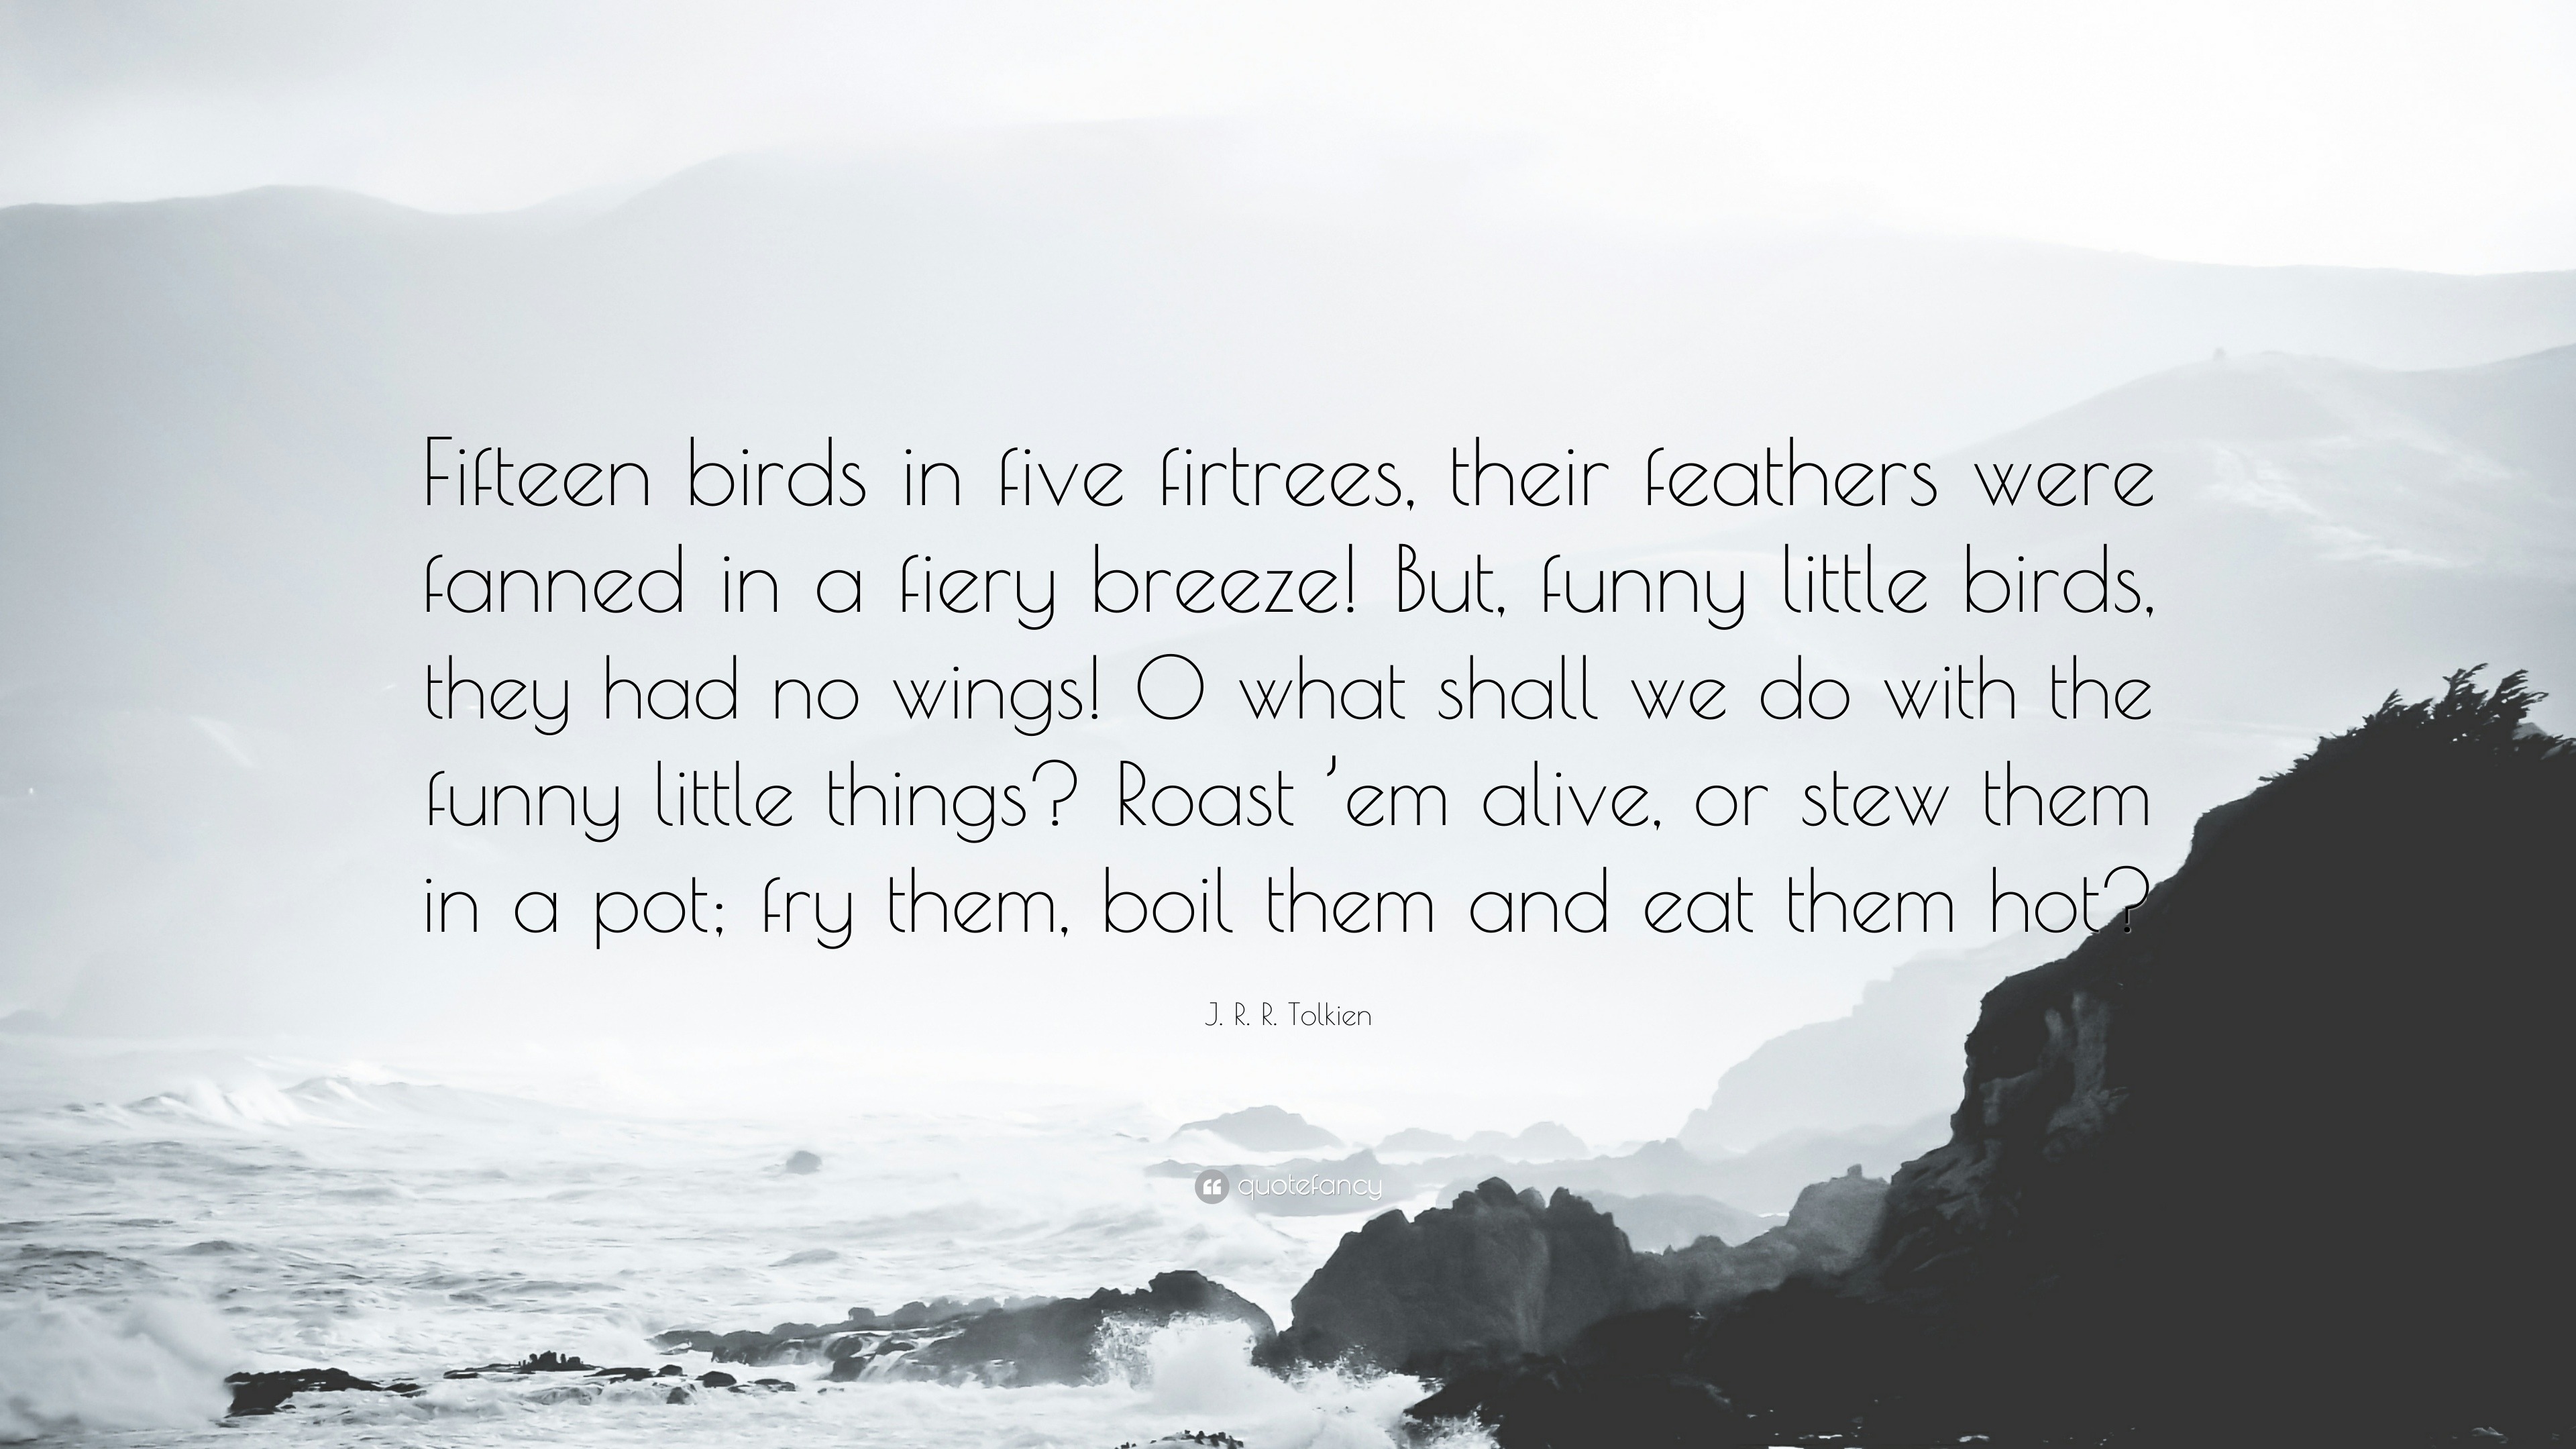 J. R. R. Tolkien Quote: “Fifteen birds in five firtrees, their feathers  were fanned in a fiery breeze! But, funny little birds, they had no  wings...”